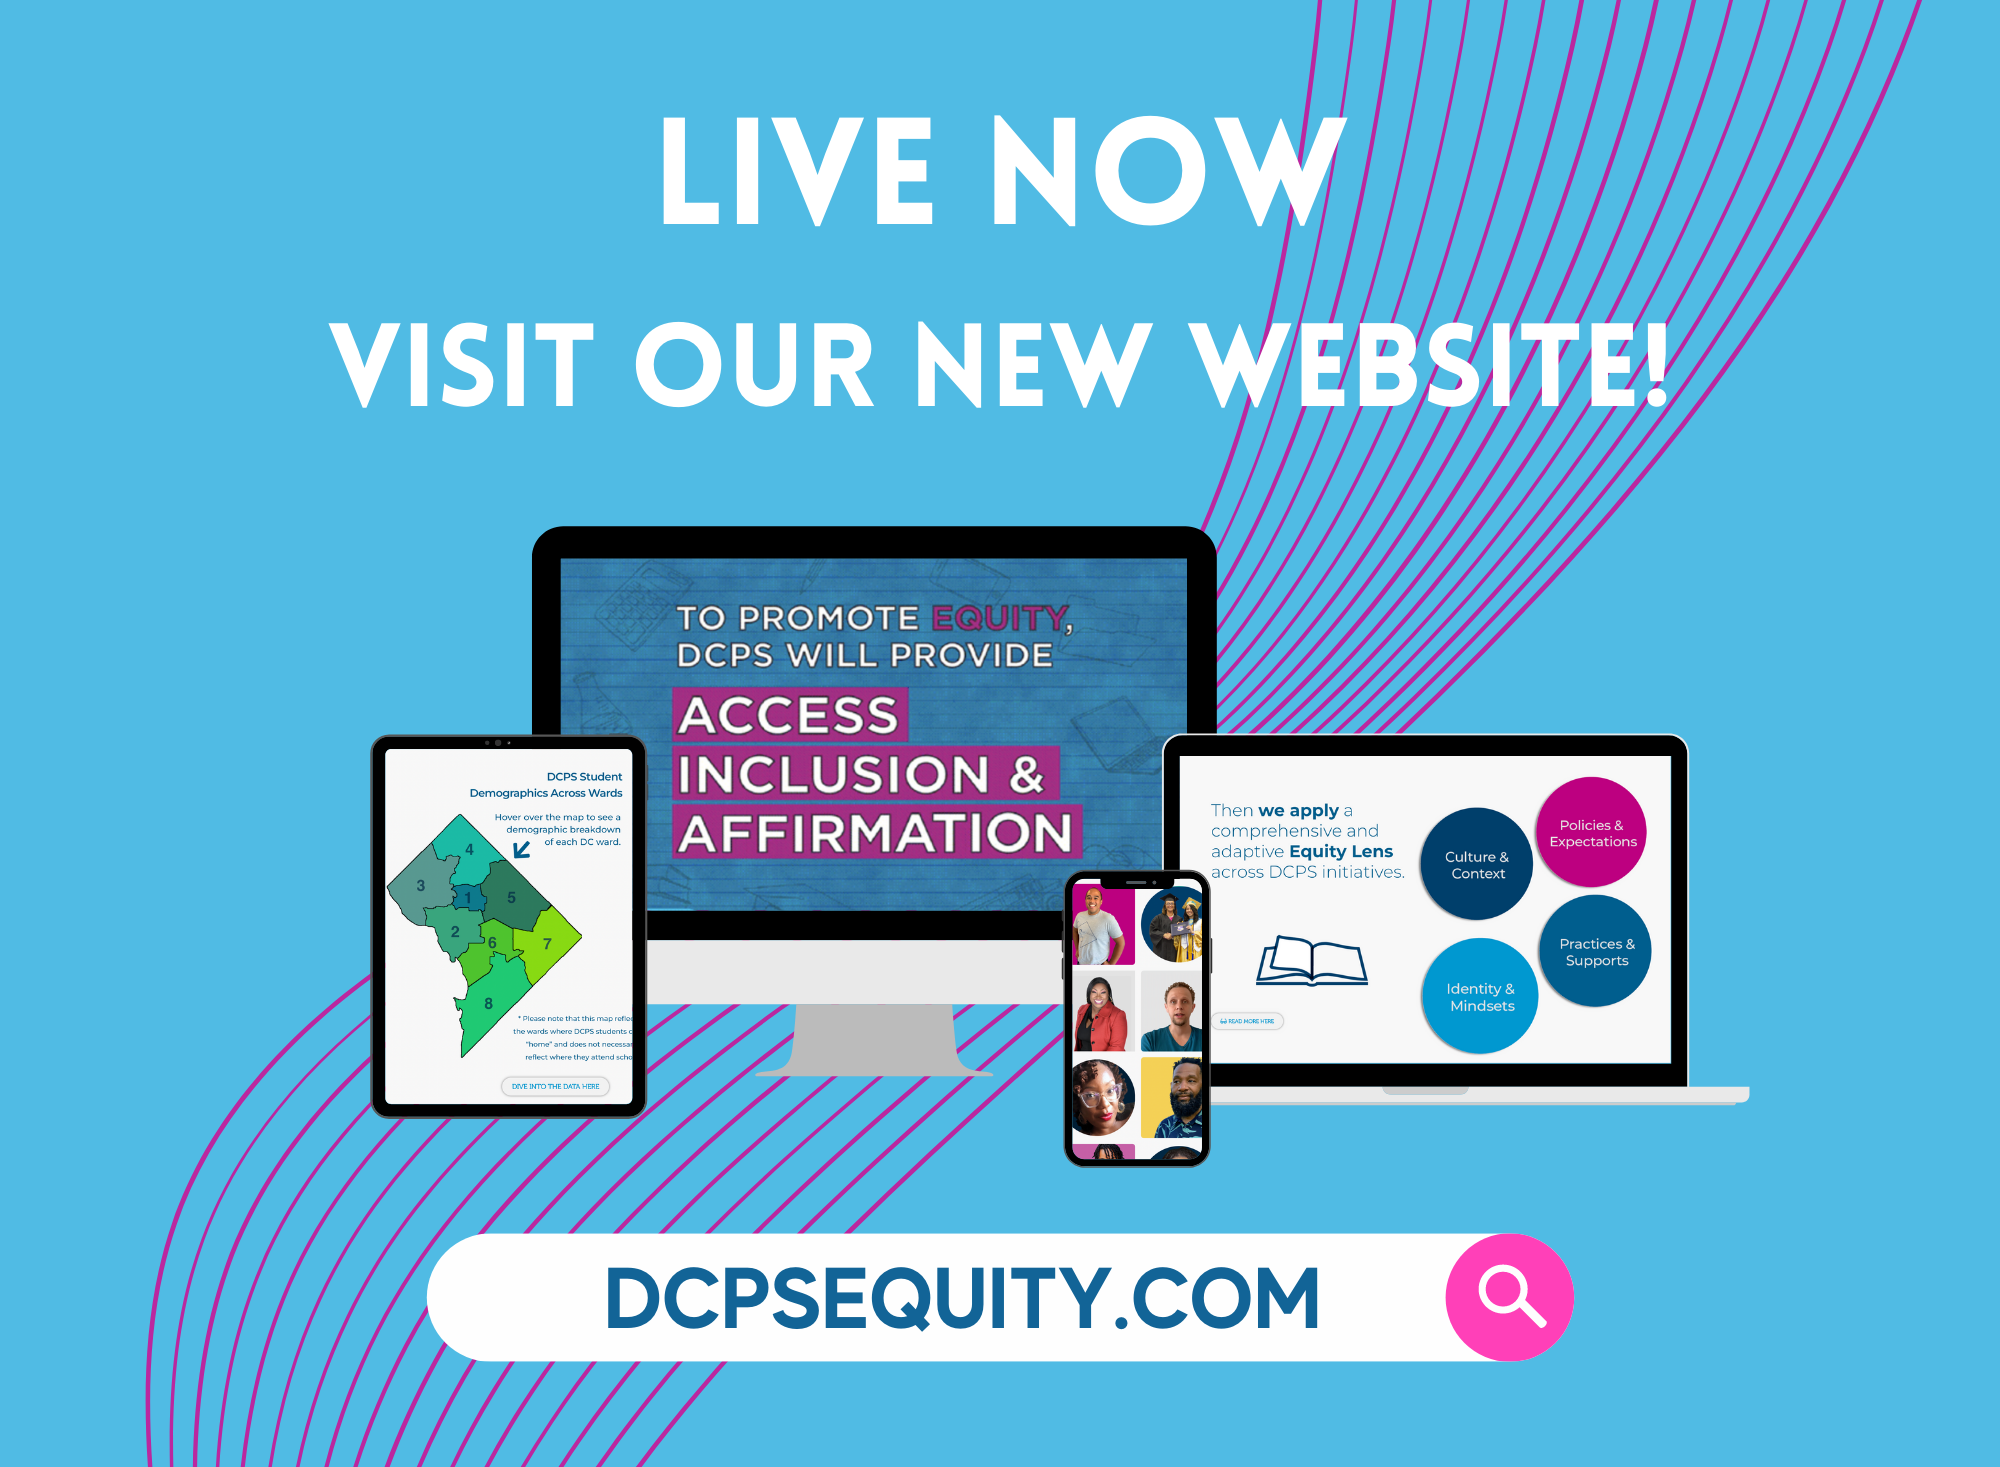 Live Now! Visit our new website - dcpsequity.com